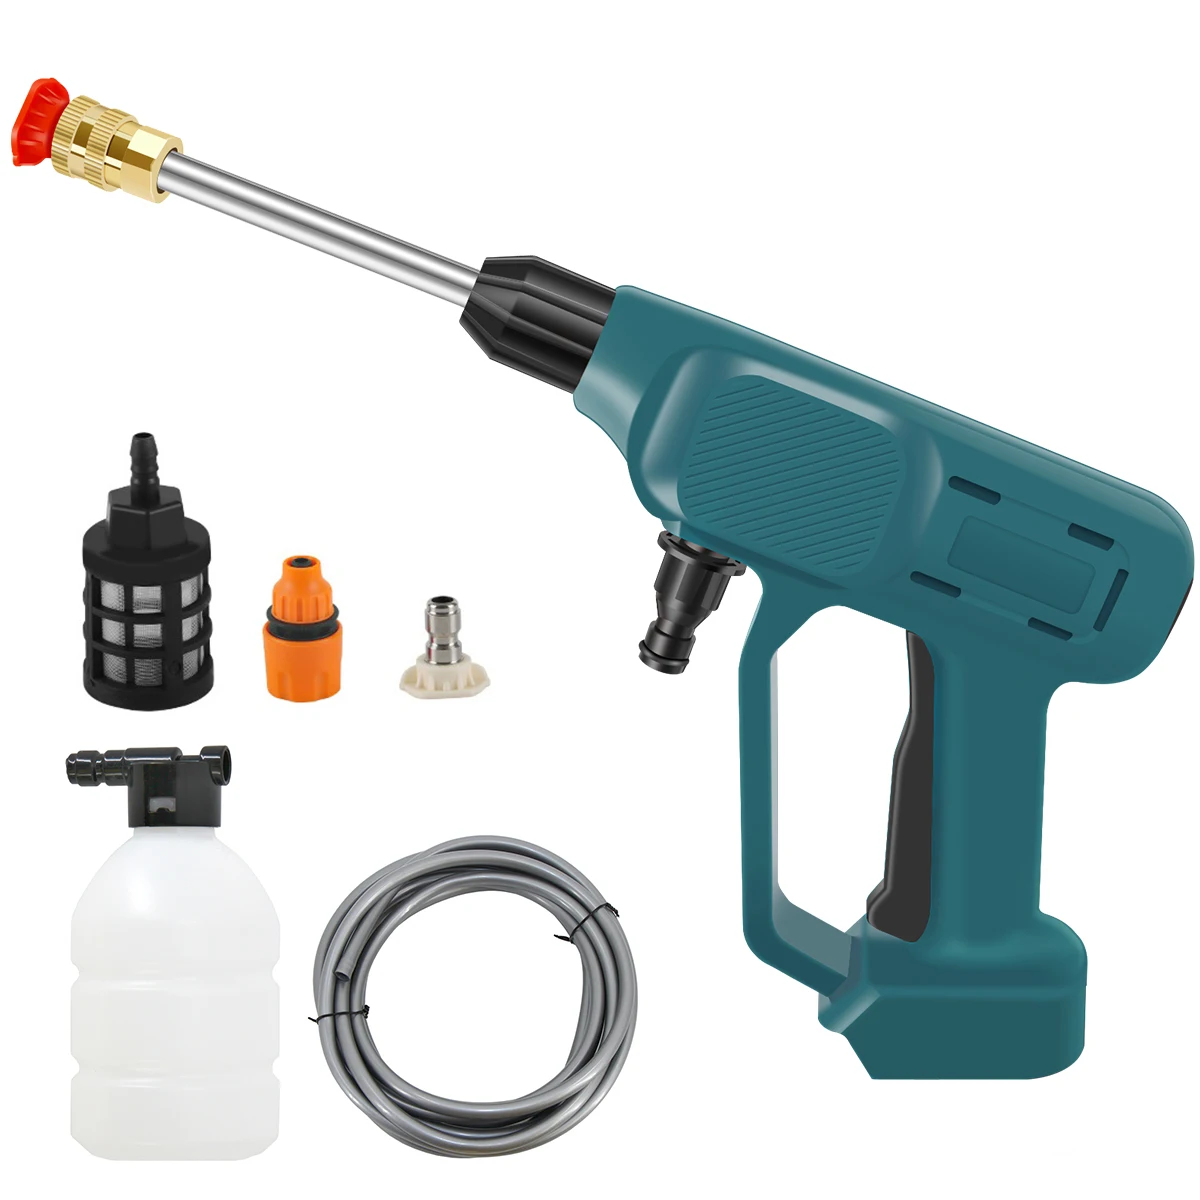 Cordless Pressure Washer Machine Portable Car Wash Water Sprayer with Nozzle Filter and Connector 30BAR Water Pressure